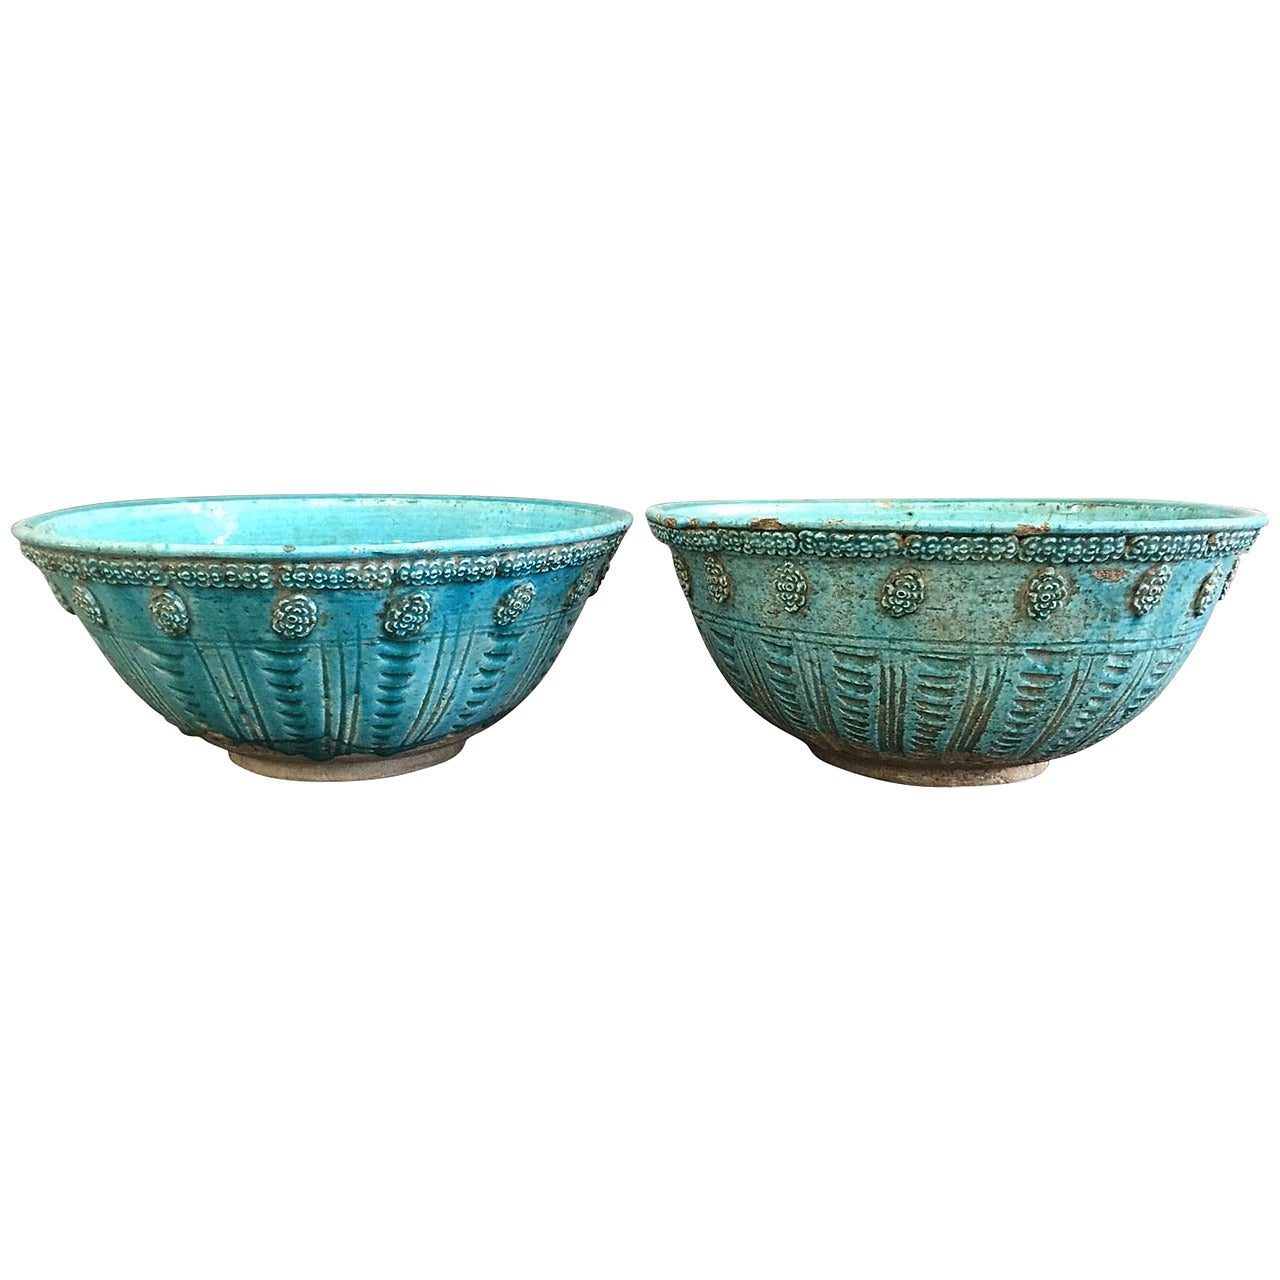 A Pair of Persian Ceramic Turquoise Handcrafted Bowls